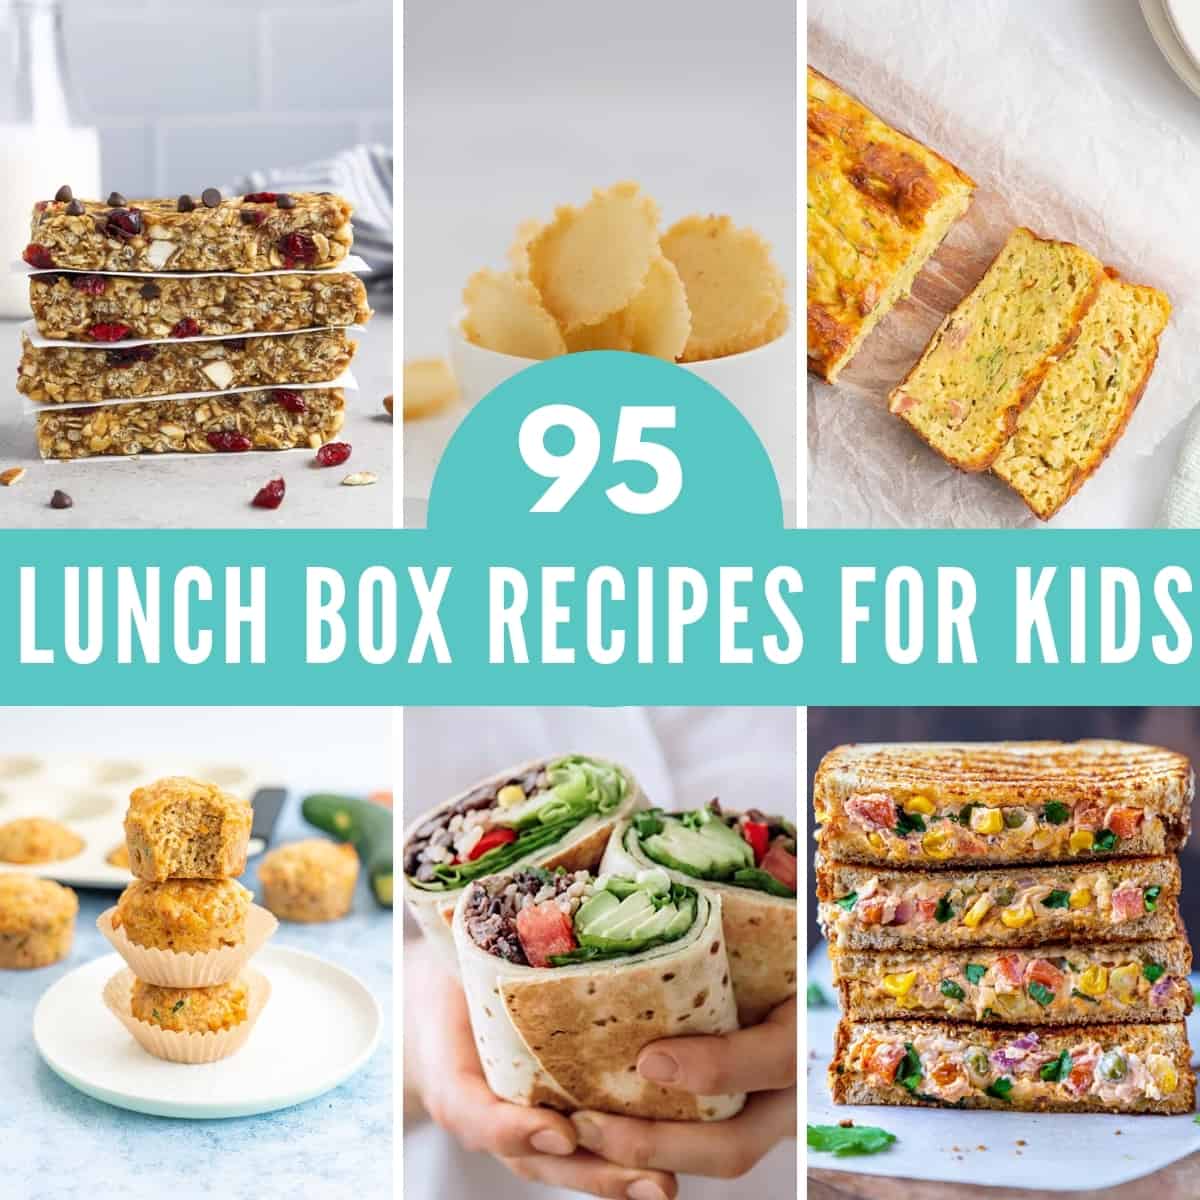 6 photo collage with text overlay '95 lunch box recipes for kids".